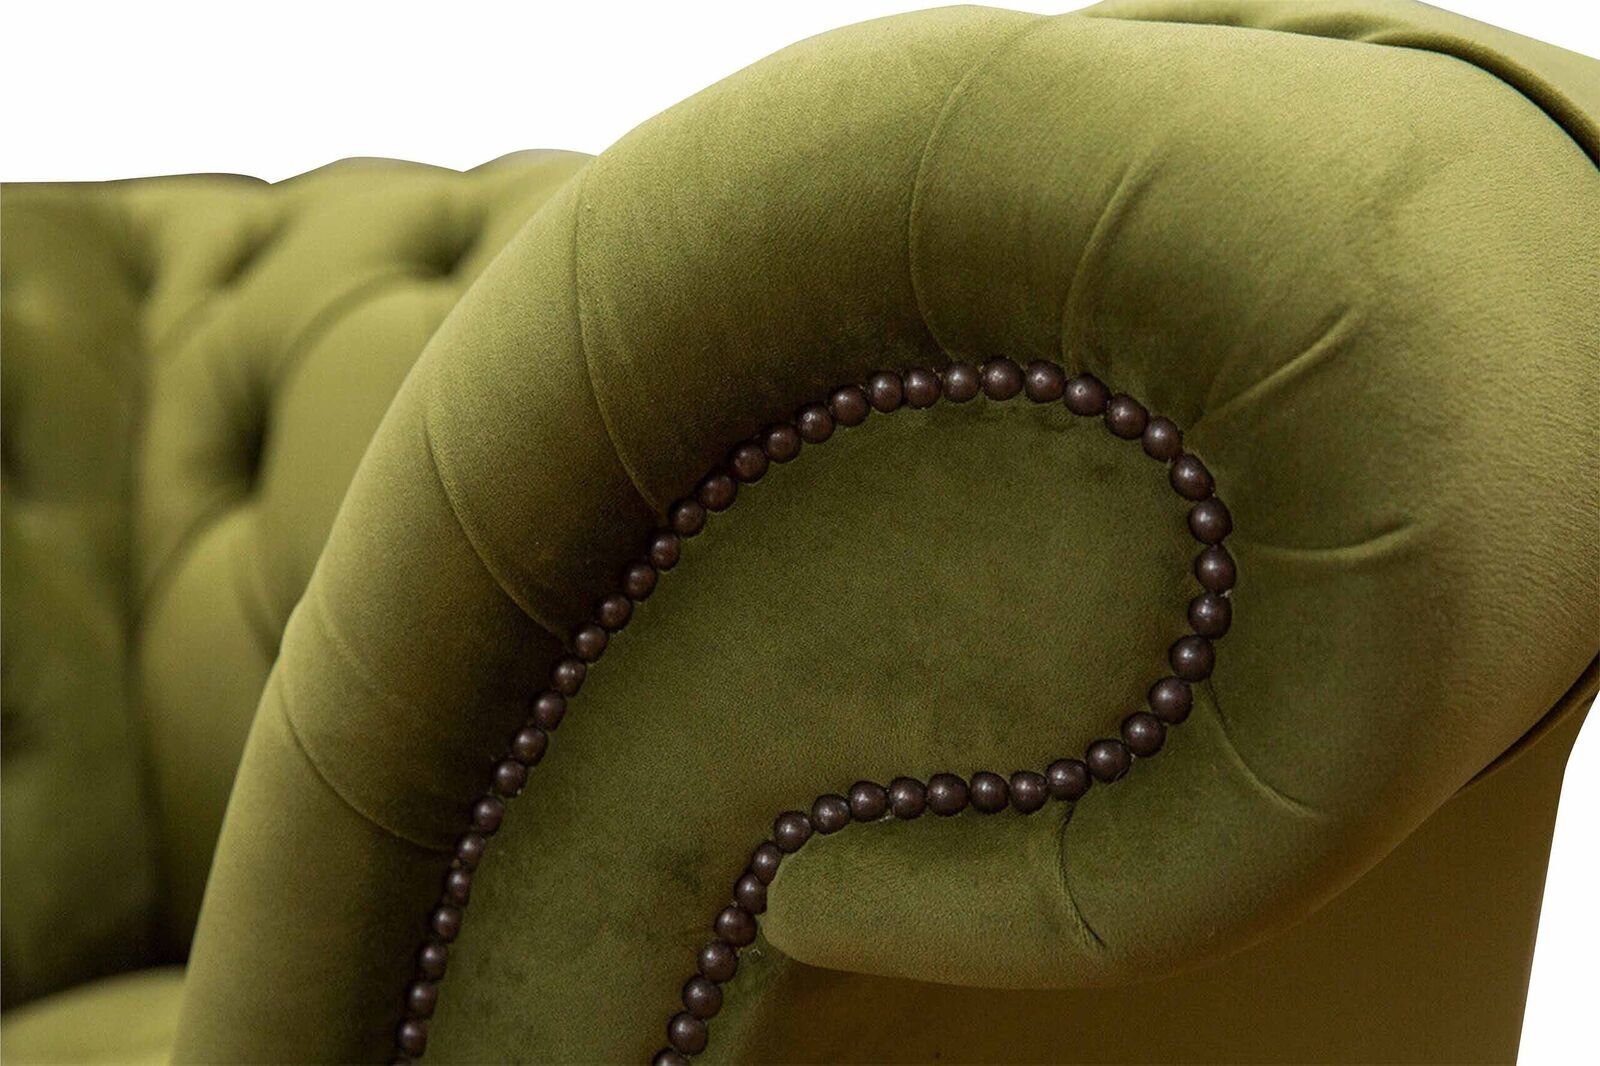 Couchen, Design Sessel Couch In Sessel Chesterfield Luxus Europe Textil JVmoebel Polster Made